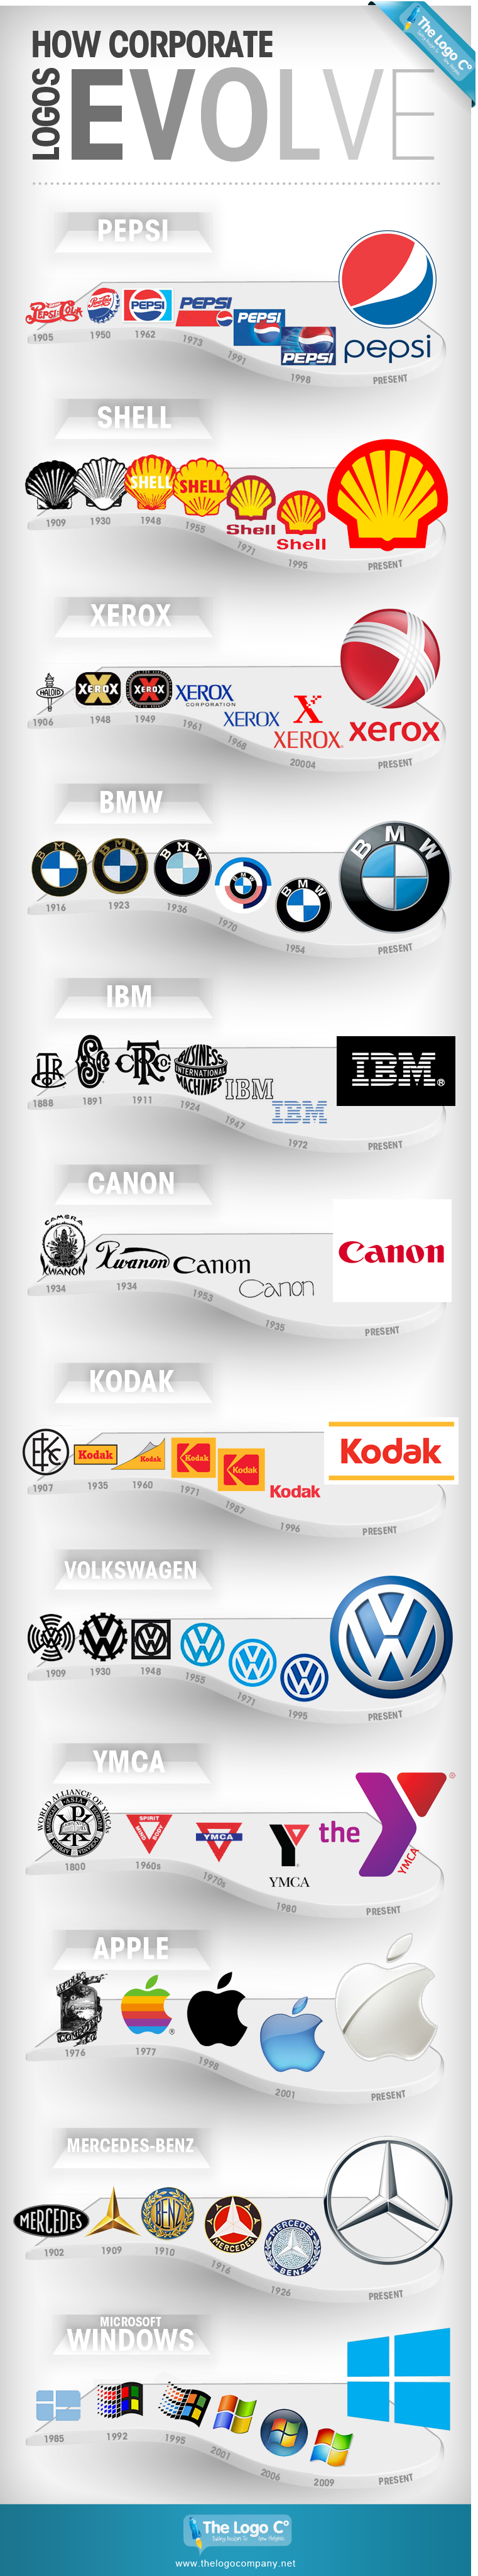 Infographic reveals the importance of logo design | Creative Bloq